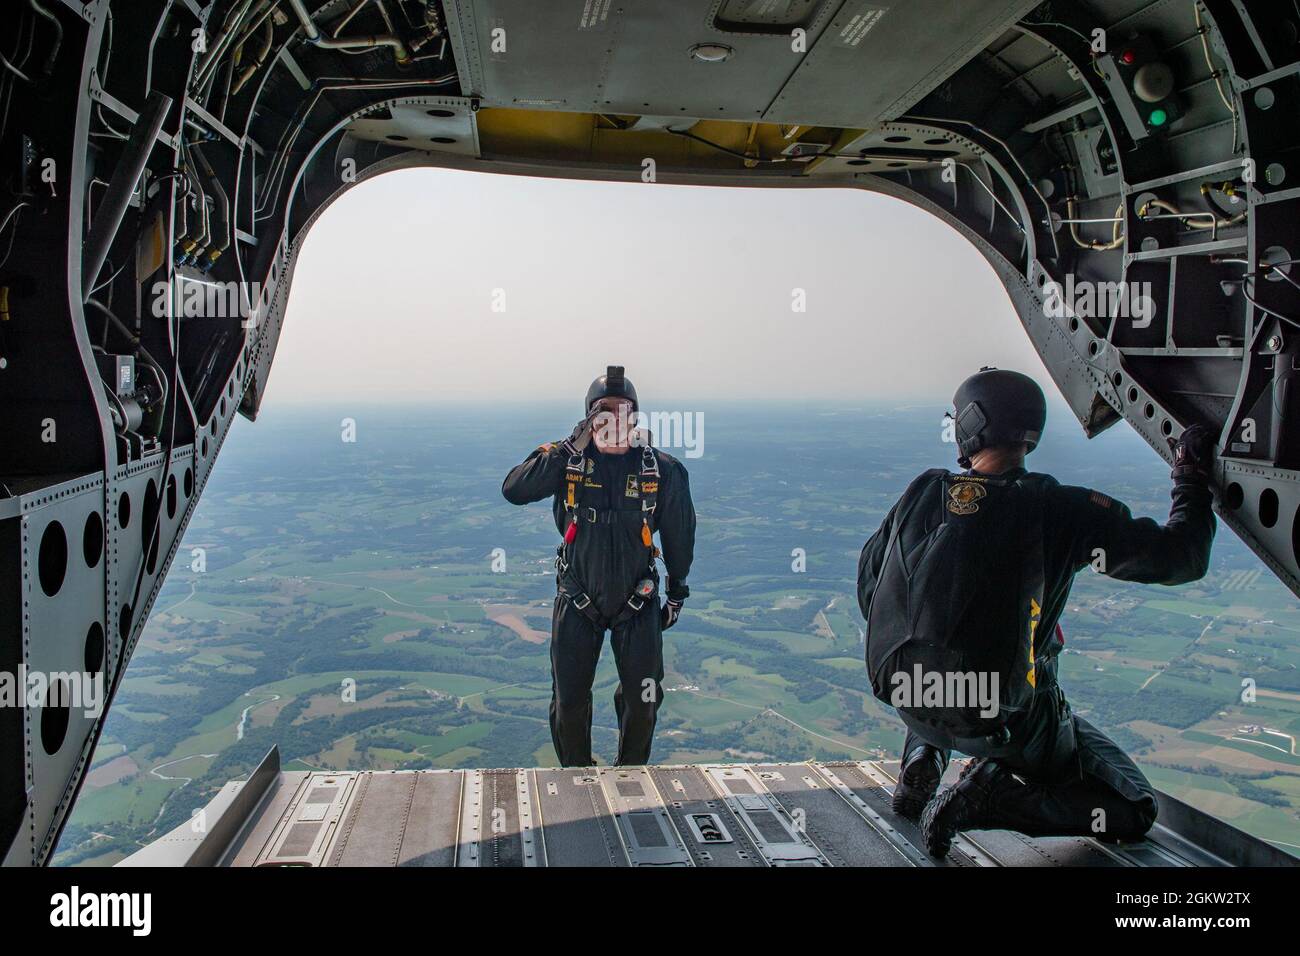 Sgt. 1st Class Danny Hellmann, member of the U.S. Army Parachute Team, jumps from a CH-47 Chinook helicopter over Hazel Green, Illinois, July 3, 2021. The U.S. Army Parachute Team performs aerial demonstrations in support of recruiting. Stock Photo